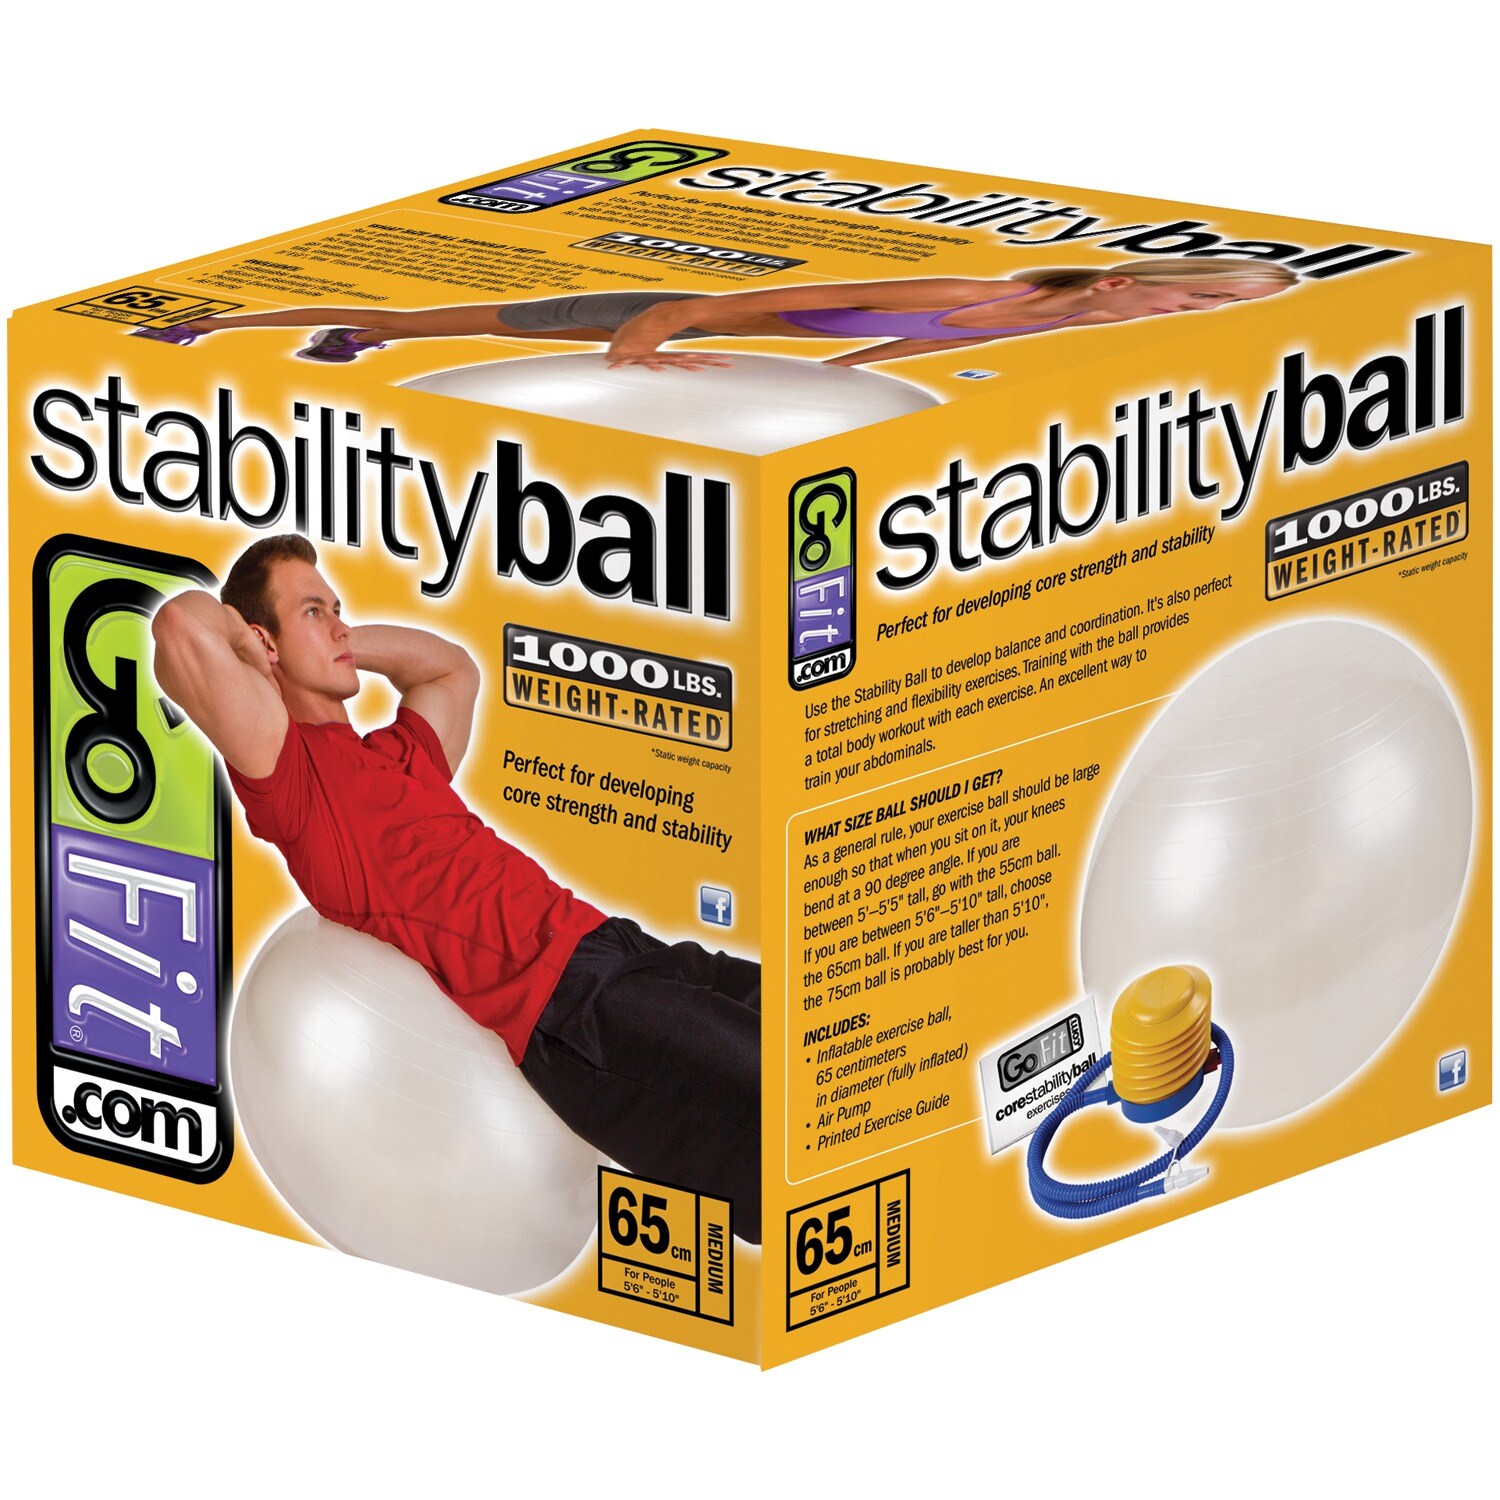 NordicTrack Fitness Ball 65cm Ideal for heights 5'3 to 5'11 